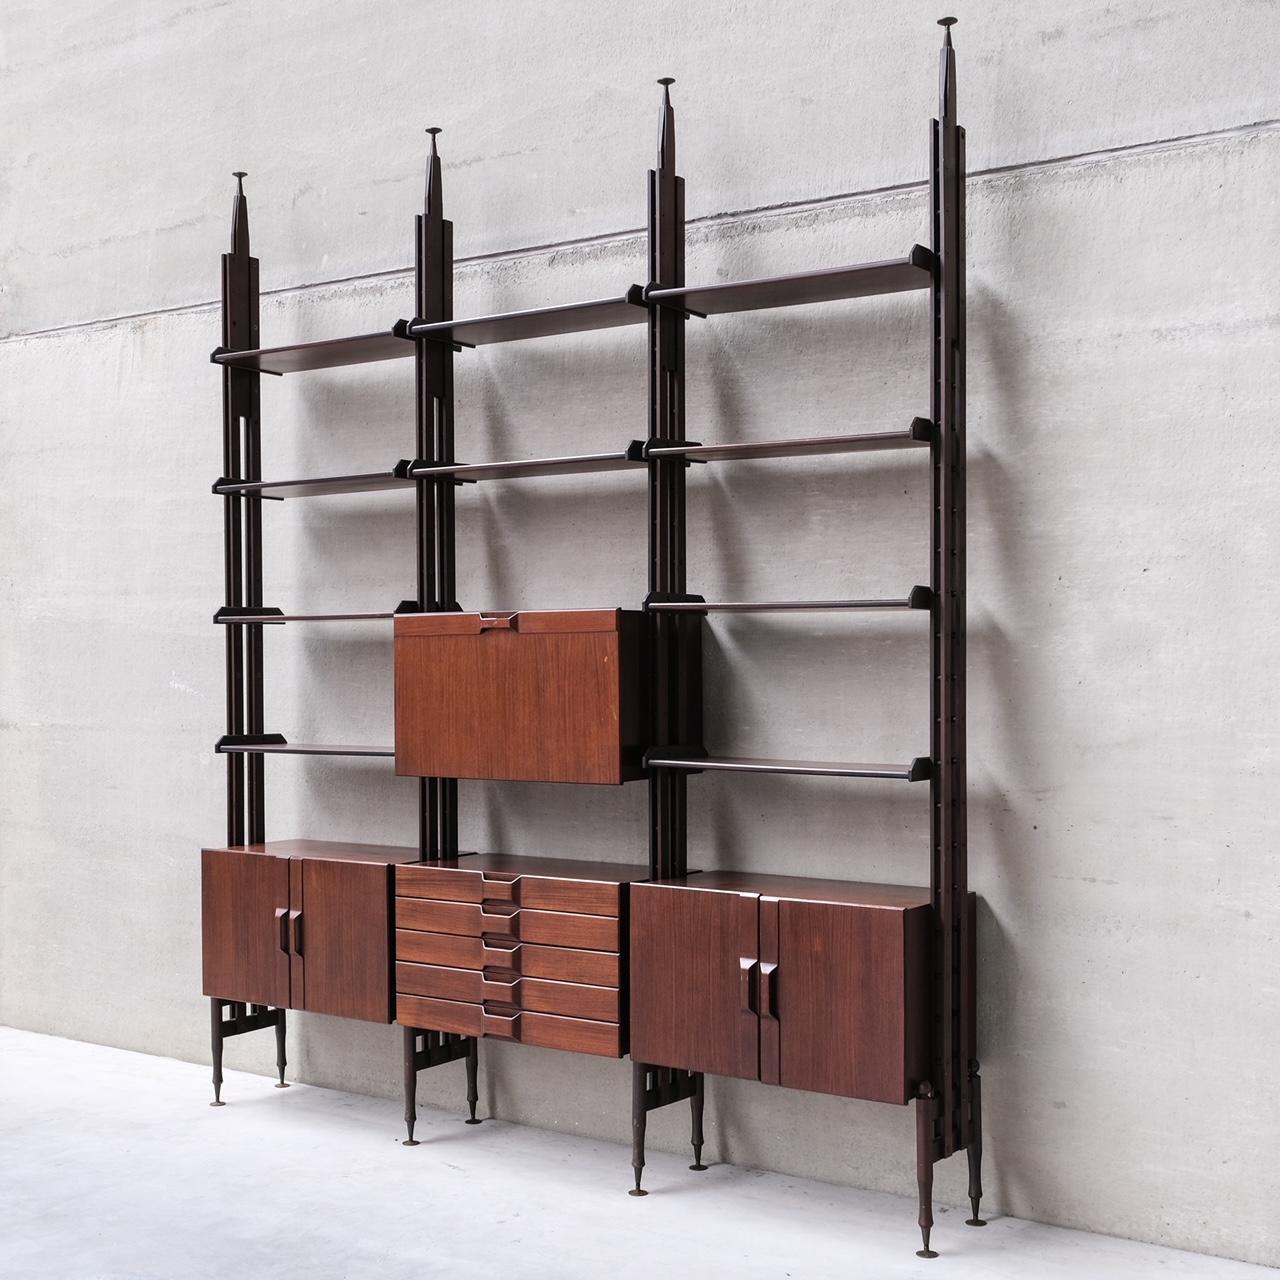 A large display shelving unit. 

Italy, c1960s. 

Good quality, combining form and function. 

Some wear and scuffs commensurate with age but generally good condition. 

Self stands but best attached to the ceiling for support.